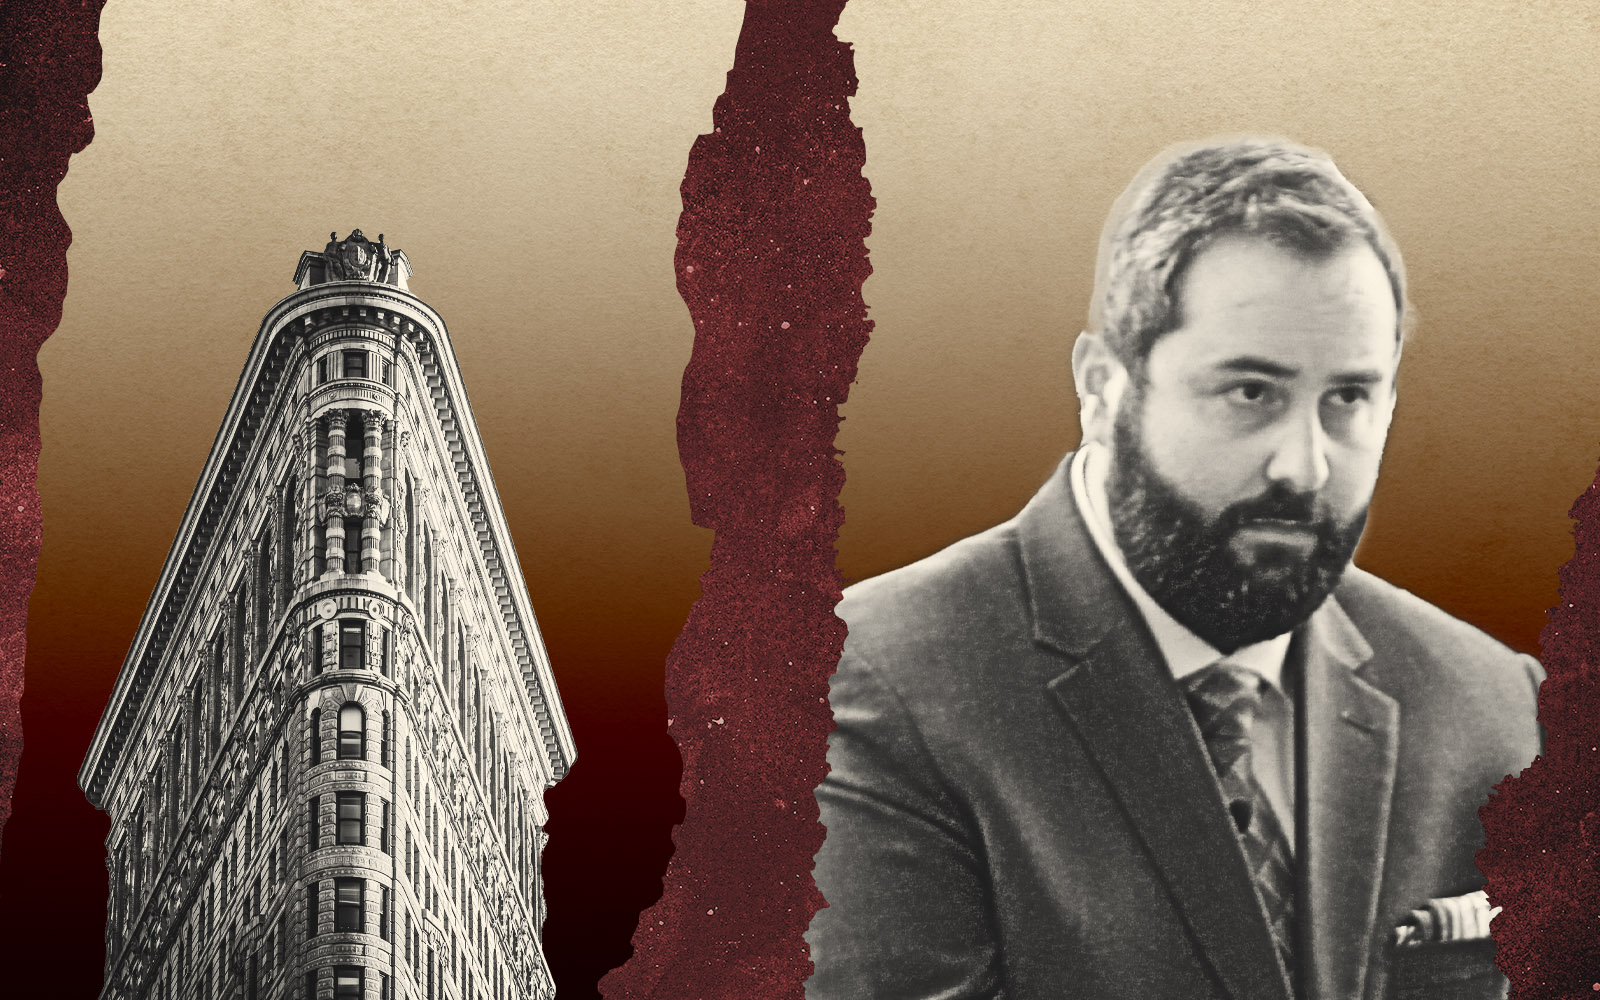 The Flatiron fiasco: How a key blunder left a New York icon in limbo